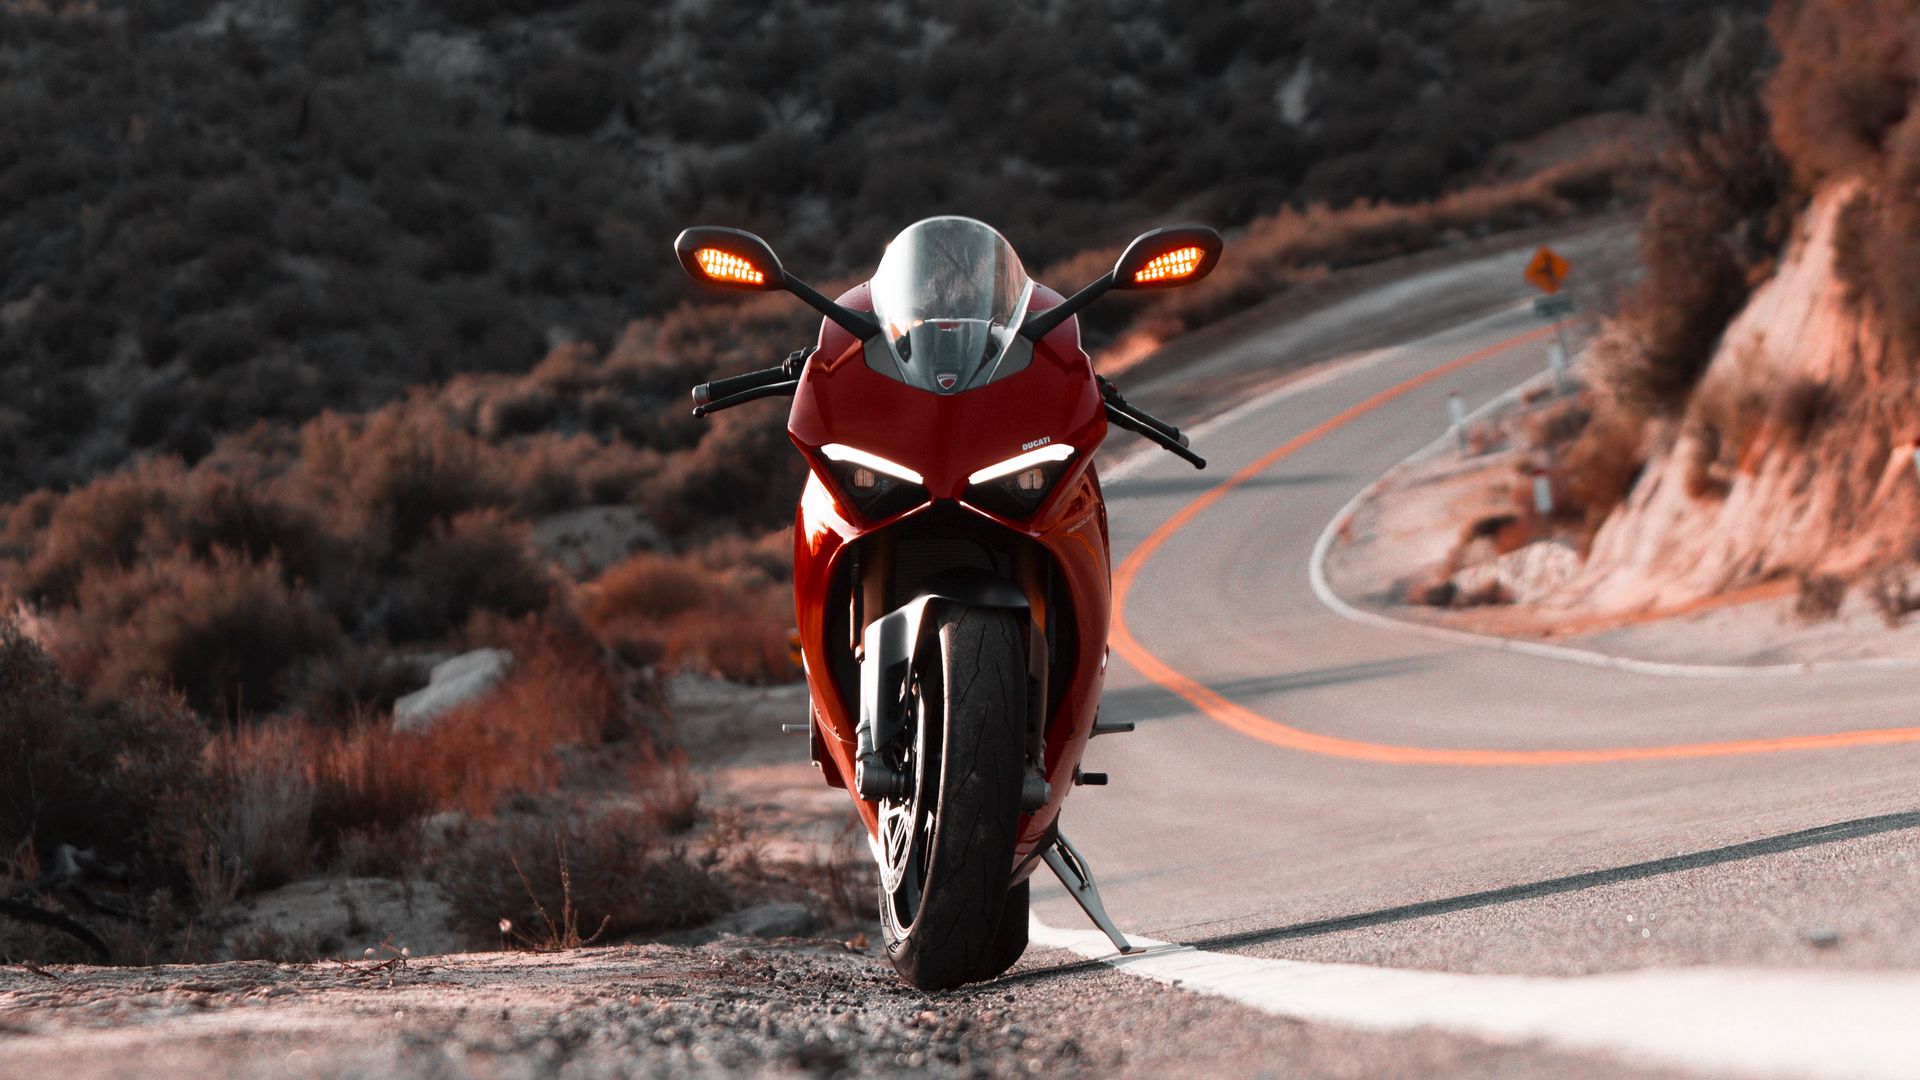 Download wallpaper 1920x1080 ducati panigale v4 s, ducati, motorcycle,  bike, red, front view full hd, hdtv, fhd, 1080p hd background